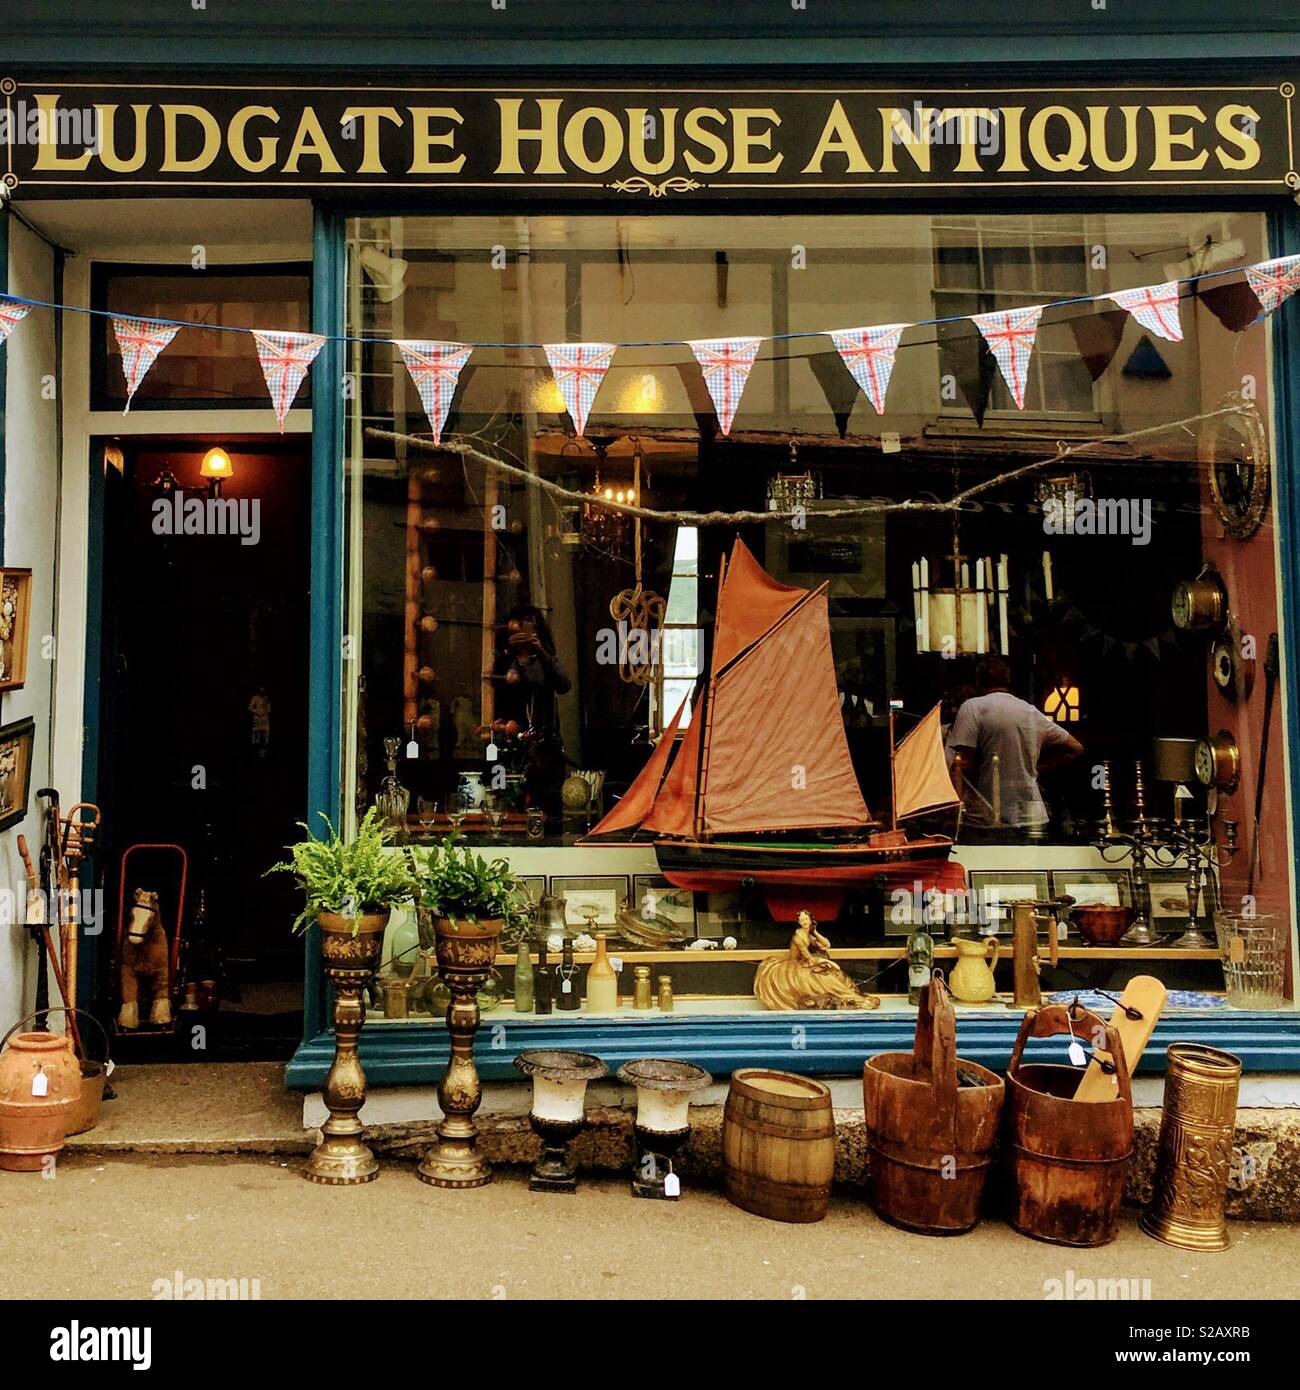 Ludgate House antique shop, Falmouth with boat in the window. Stock Photo